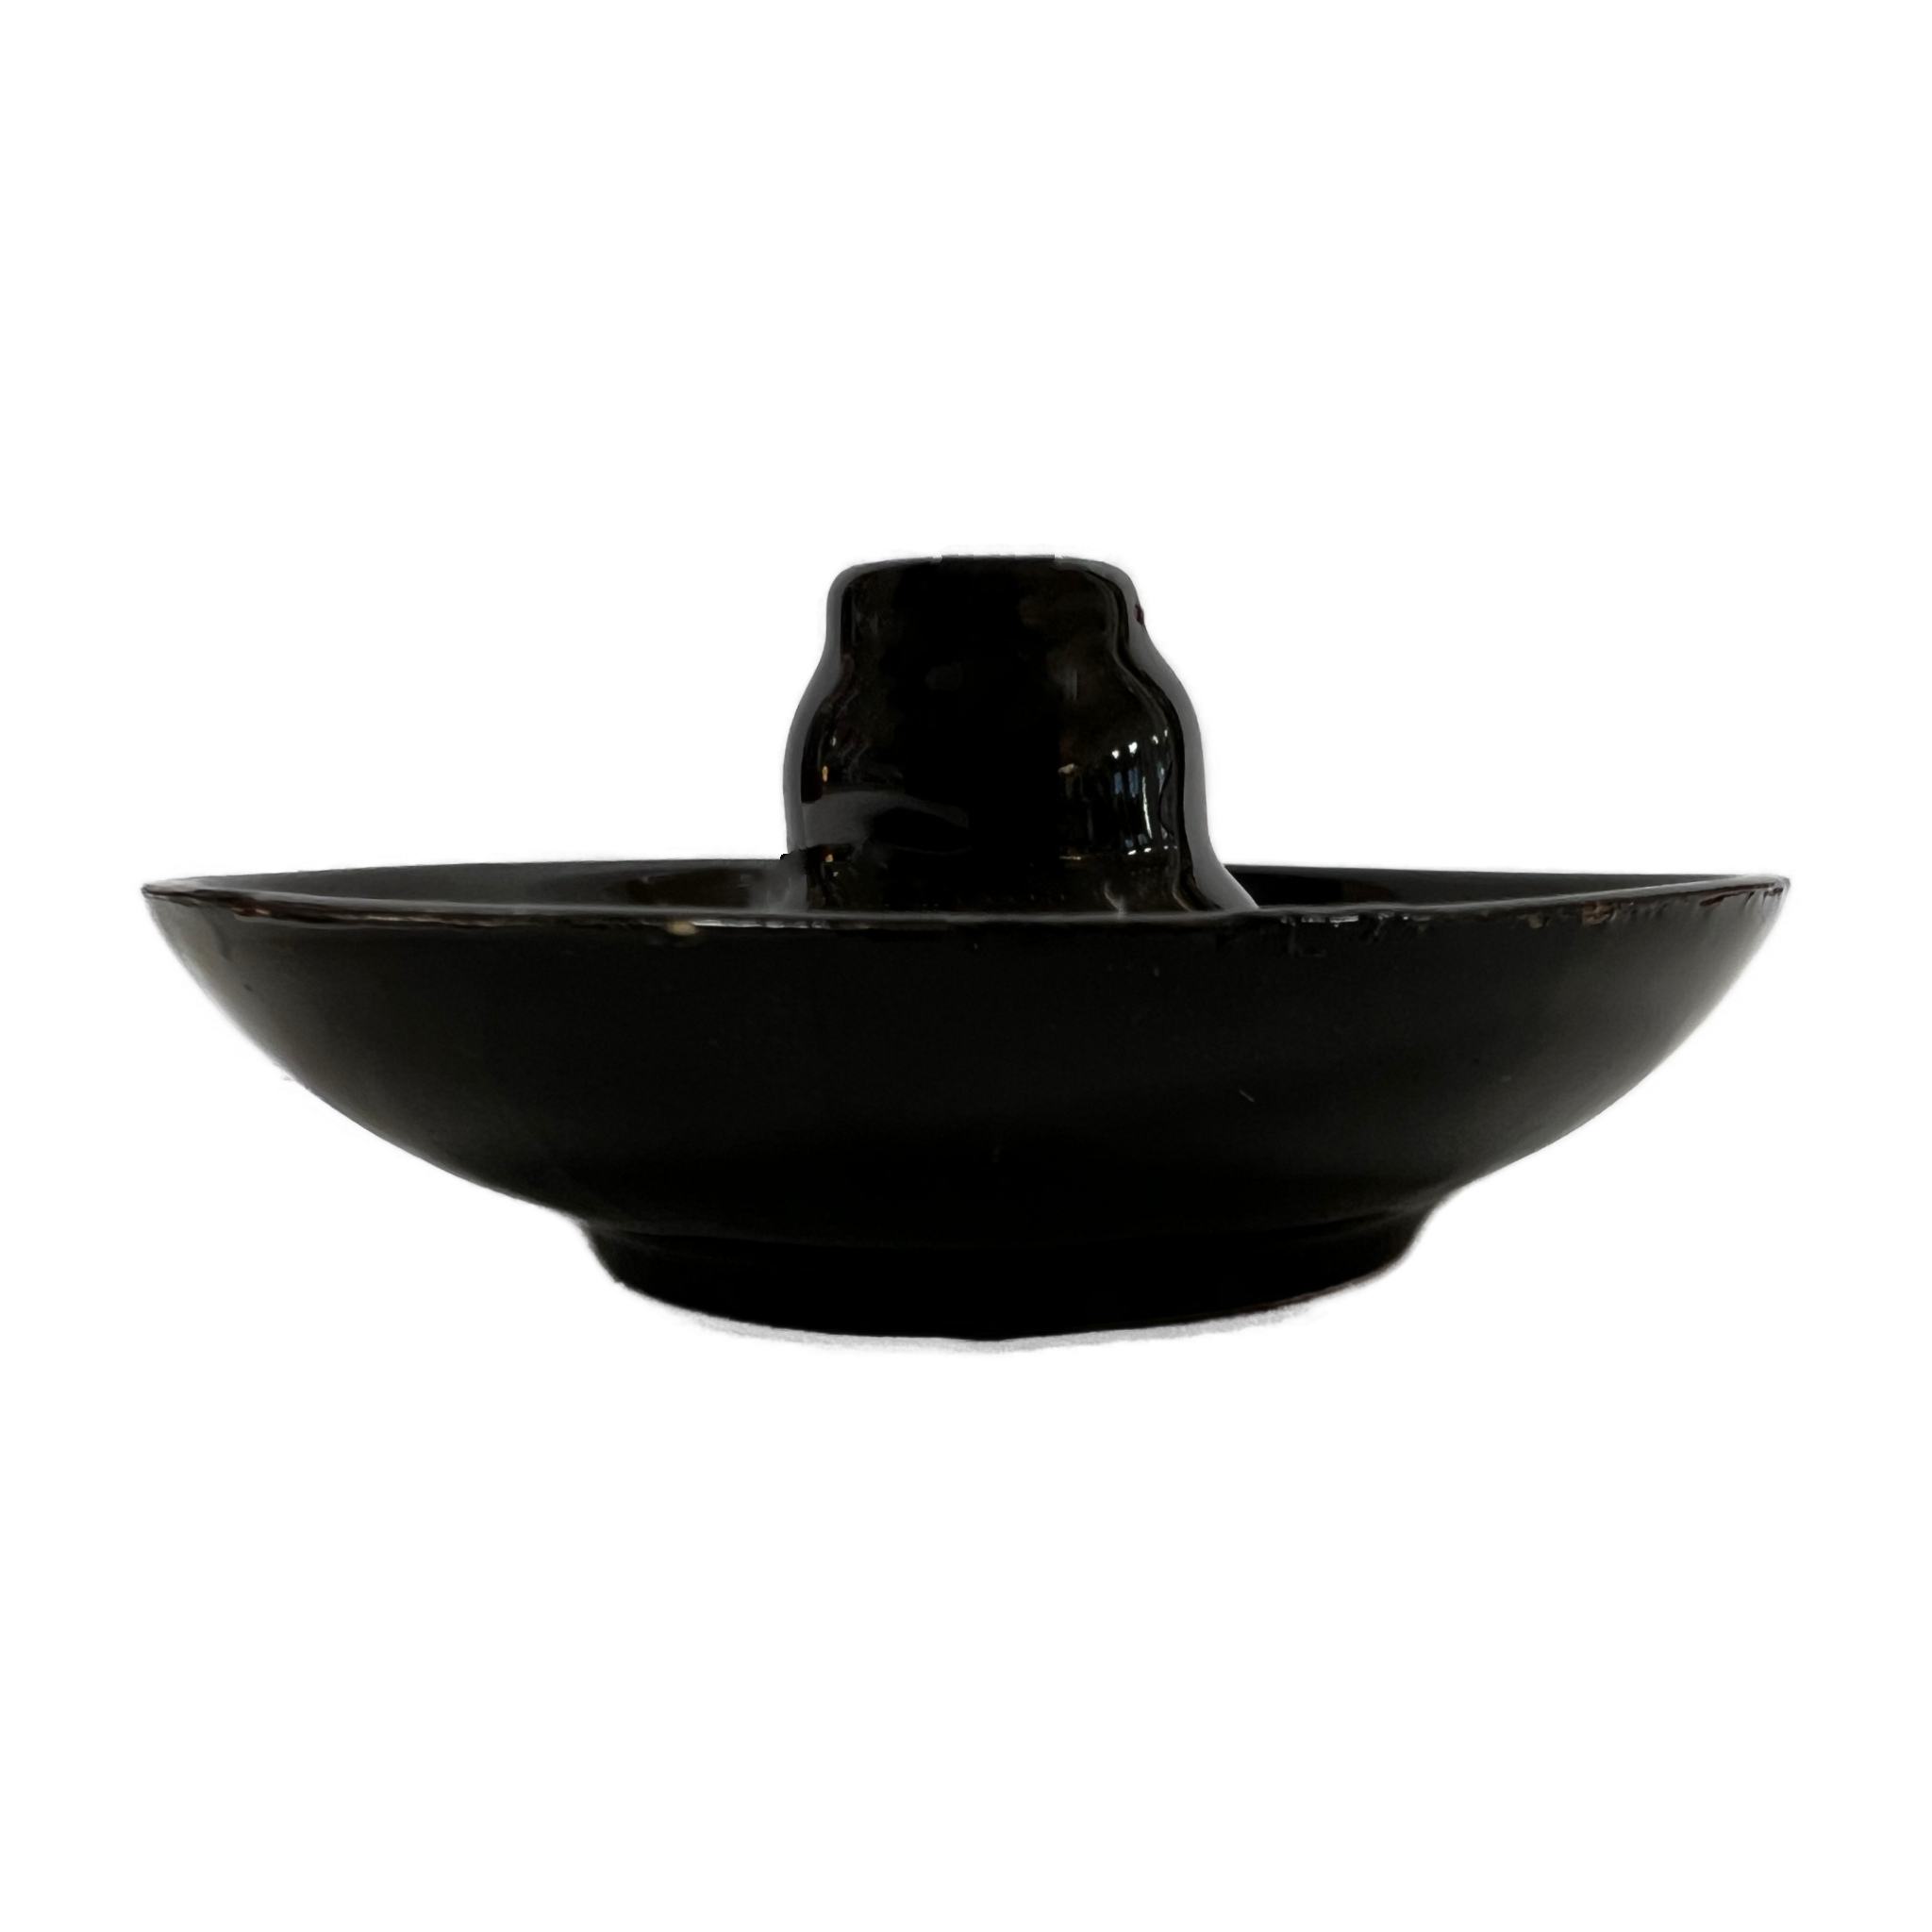 round black dish shape with a center bubble to hold incense stick 